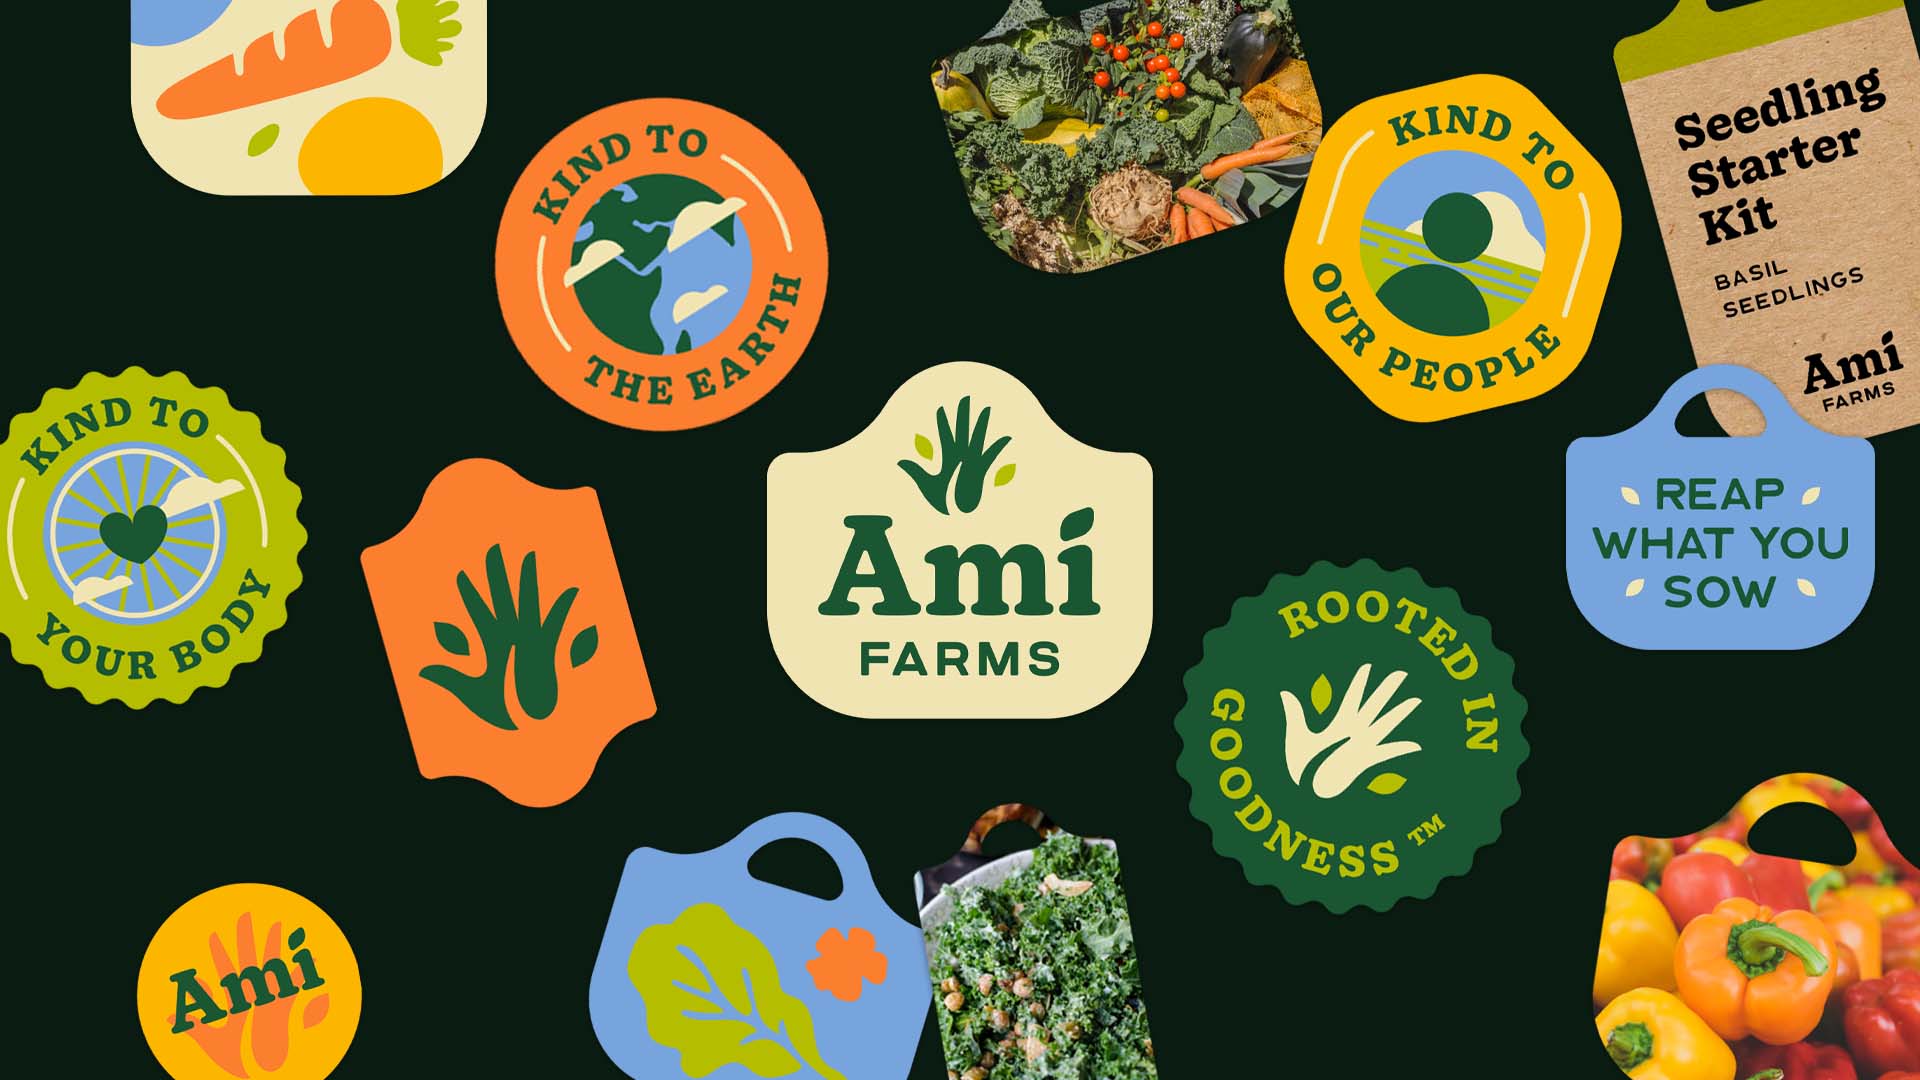 Colorful fruit stickers and badge designs for bidynamic farm and brand Ami Farms 